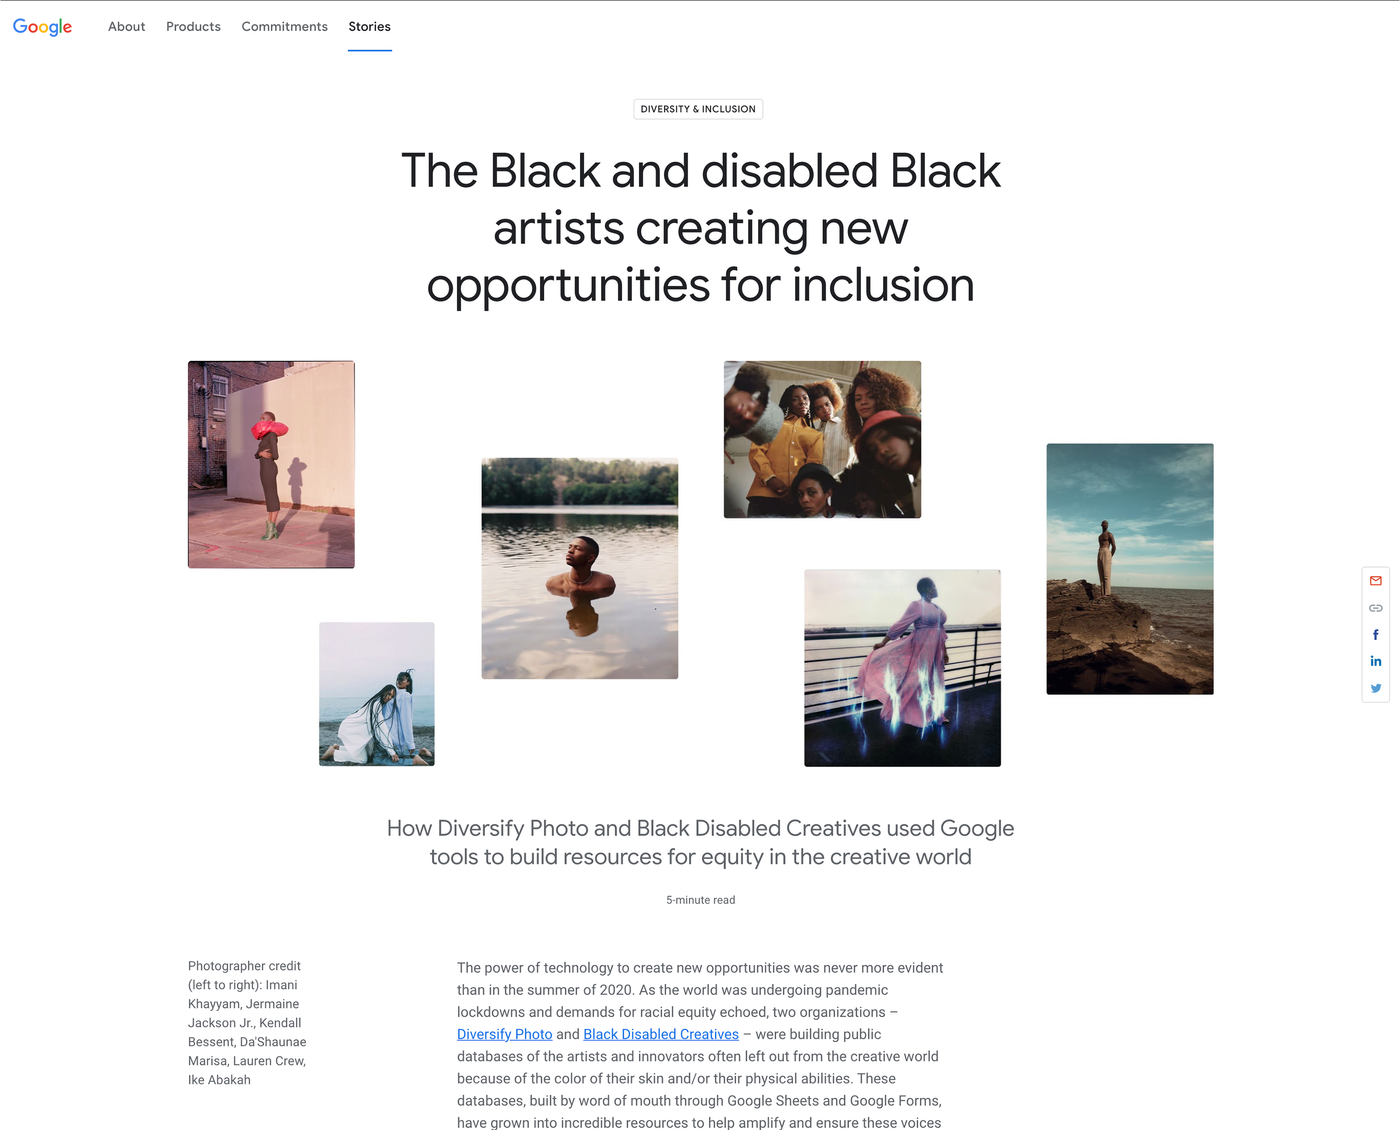 About & Recent Press - Black Disabled Creatives